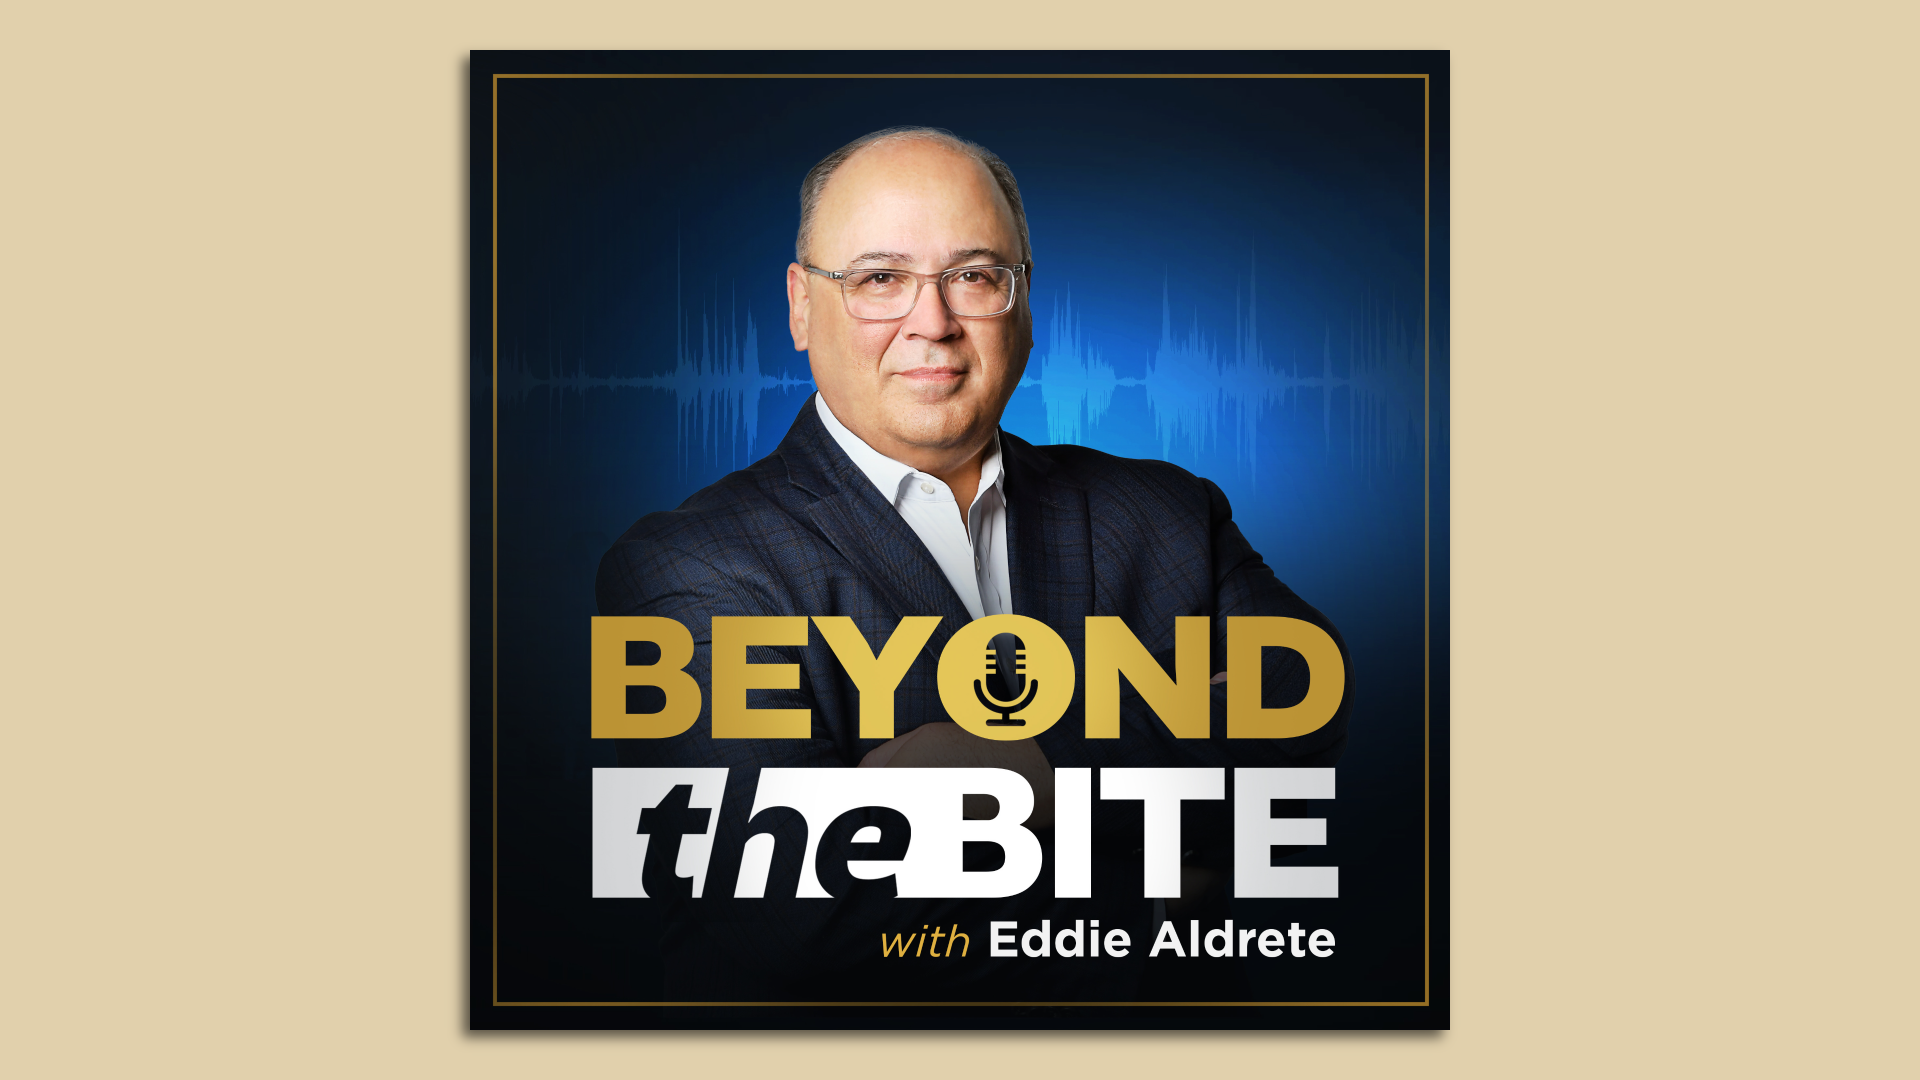 Eddie Aldrete stands behind the logo for "Beyond the Bite," his new podcast featuring conversations about local business and public policy in San Antonio.